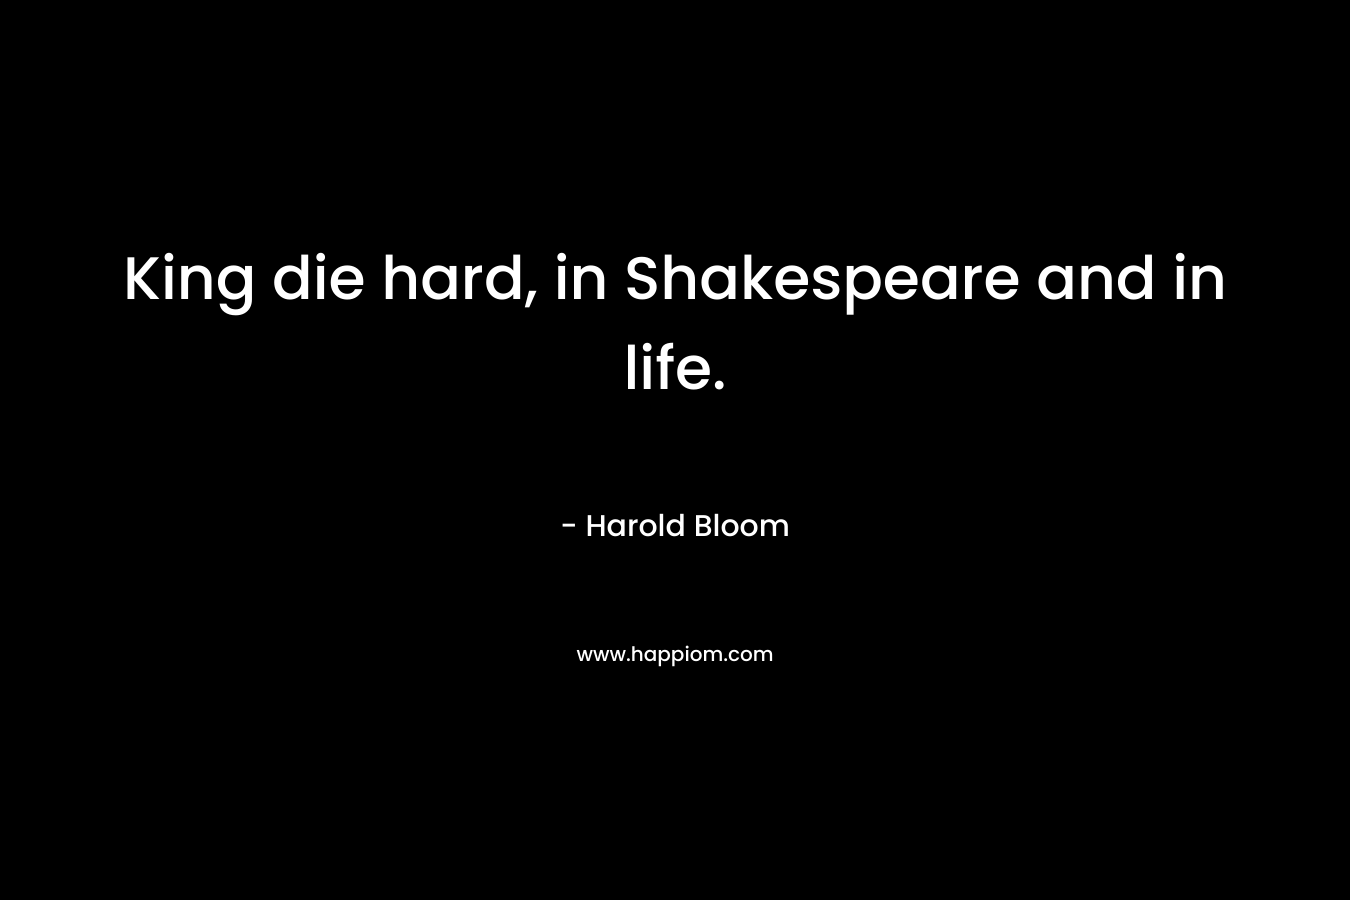 King die hard, in Shakespeare and in life.